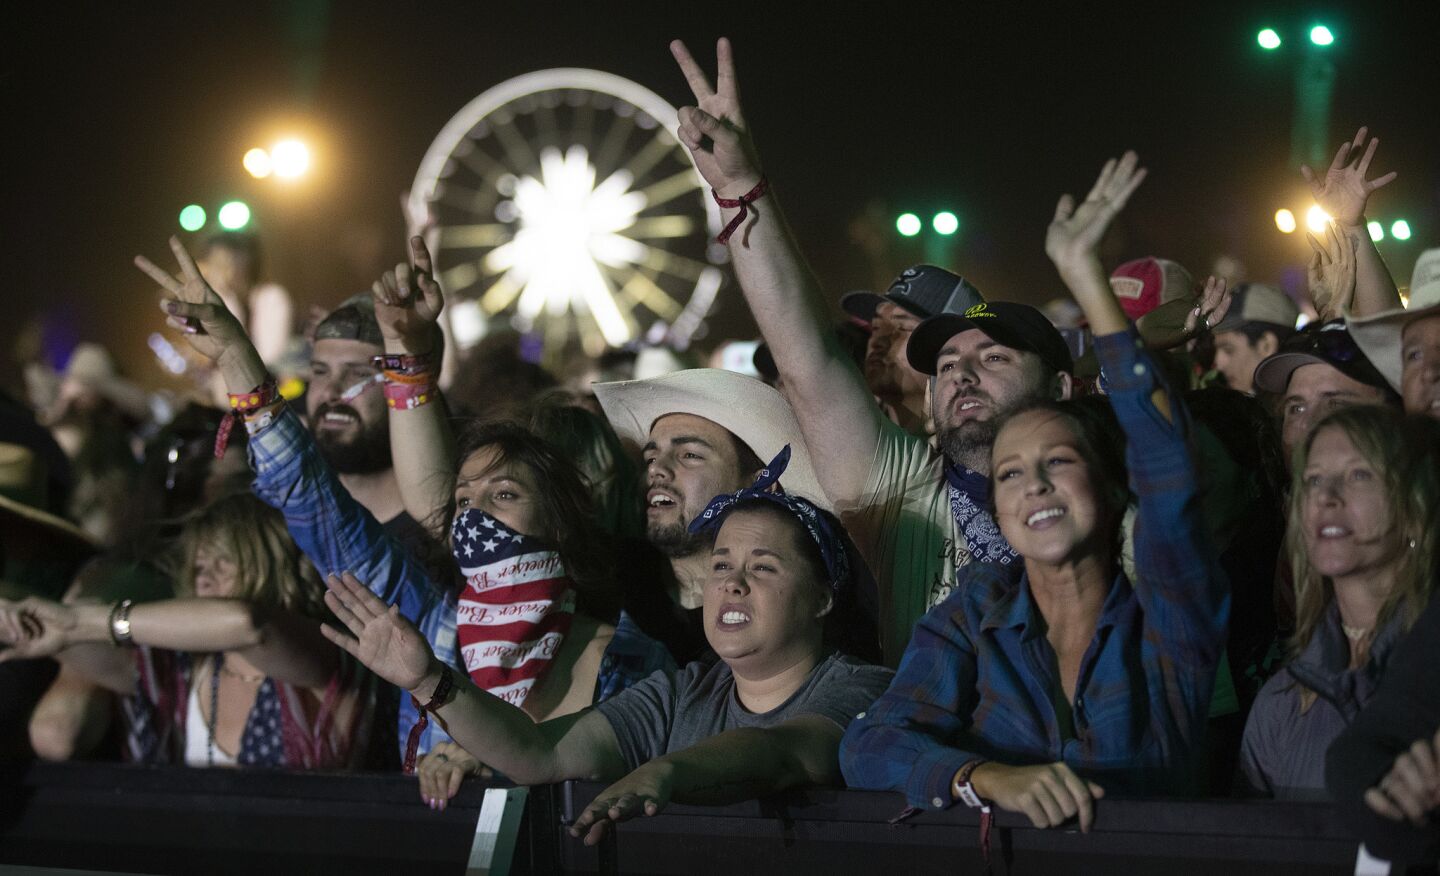 Fans show their approval as Garth Brooks performs on the Mane Stage at the Stagecoach country music festival.